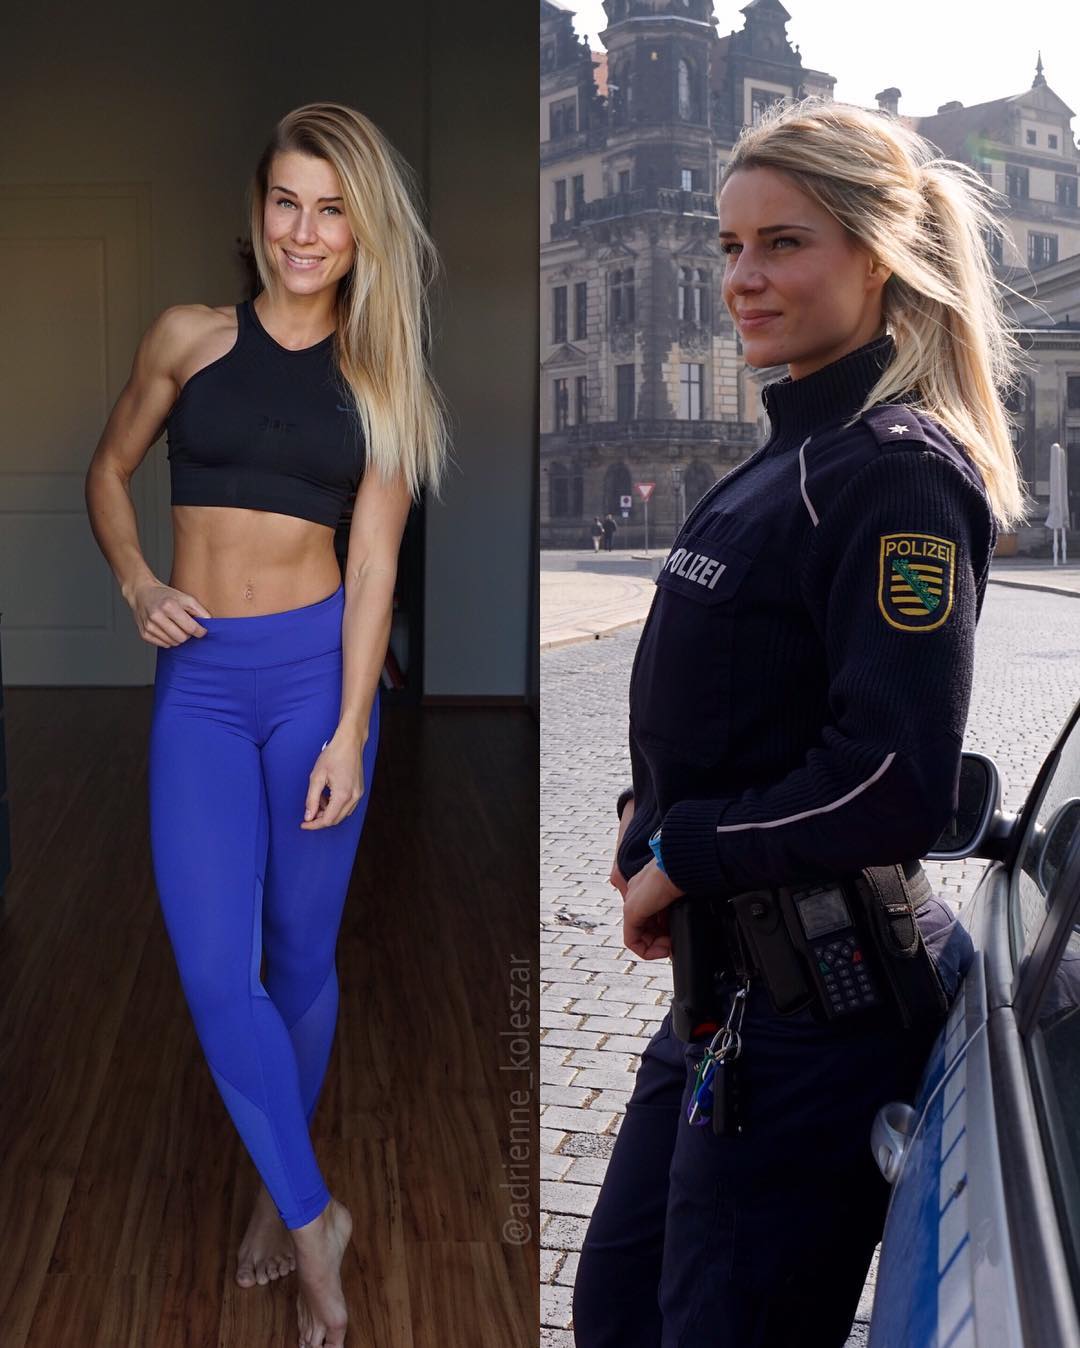 16 Photos Of World S Hottest Police Officer From Germany Reckon Talk